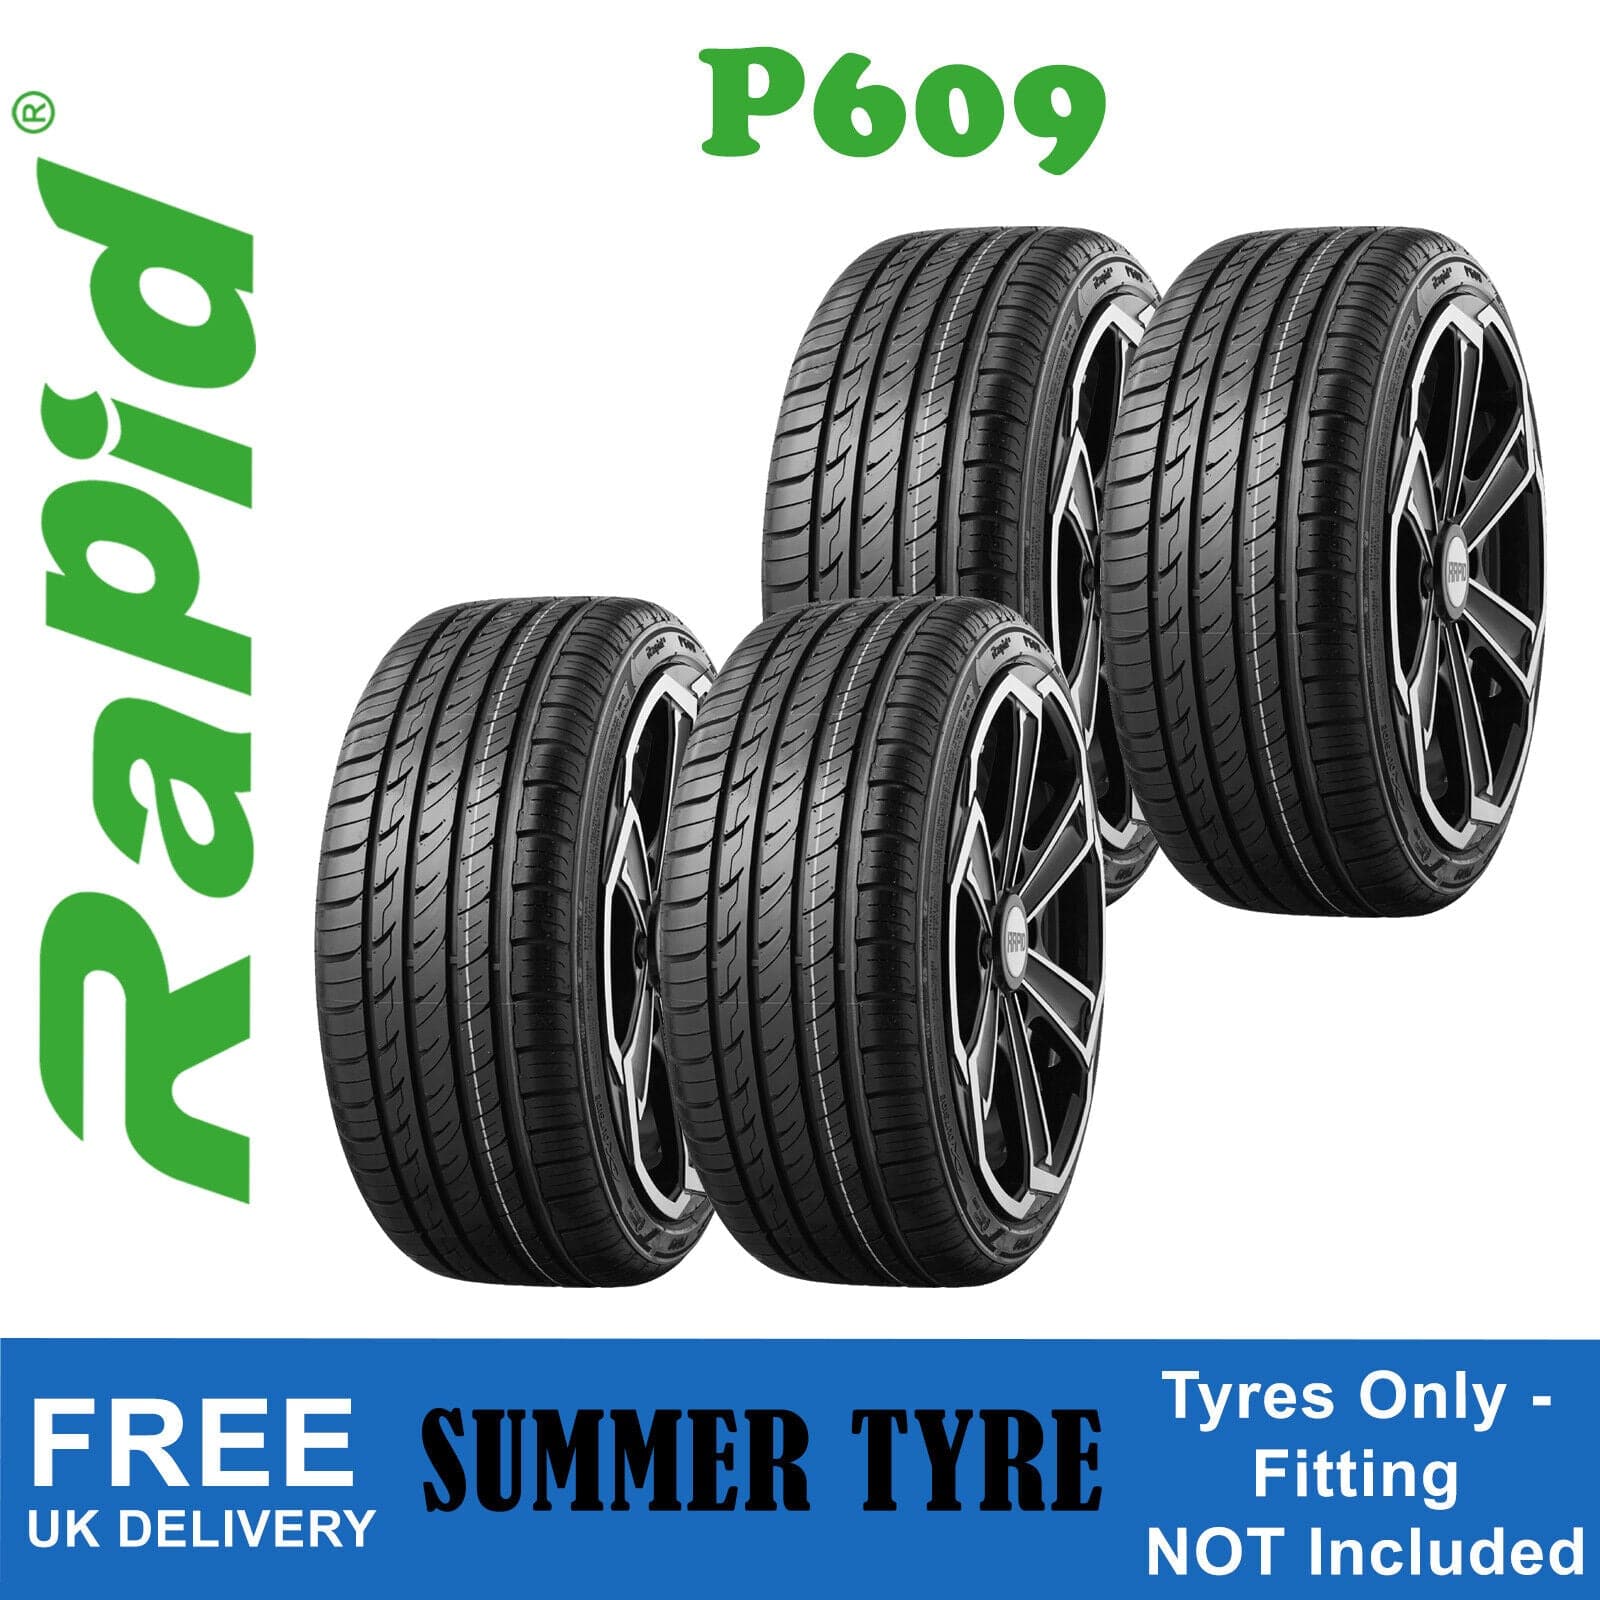 205/55/R16 Rapid Tyres 20555R16 P609 91W CB Rated 71dB Summer x4 ...